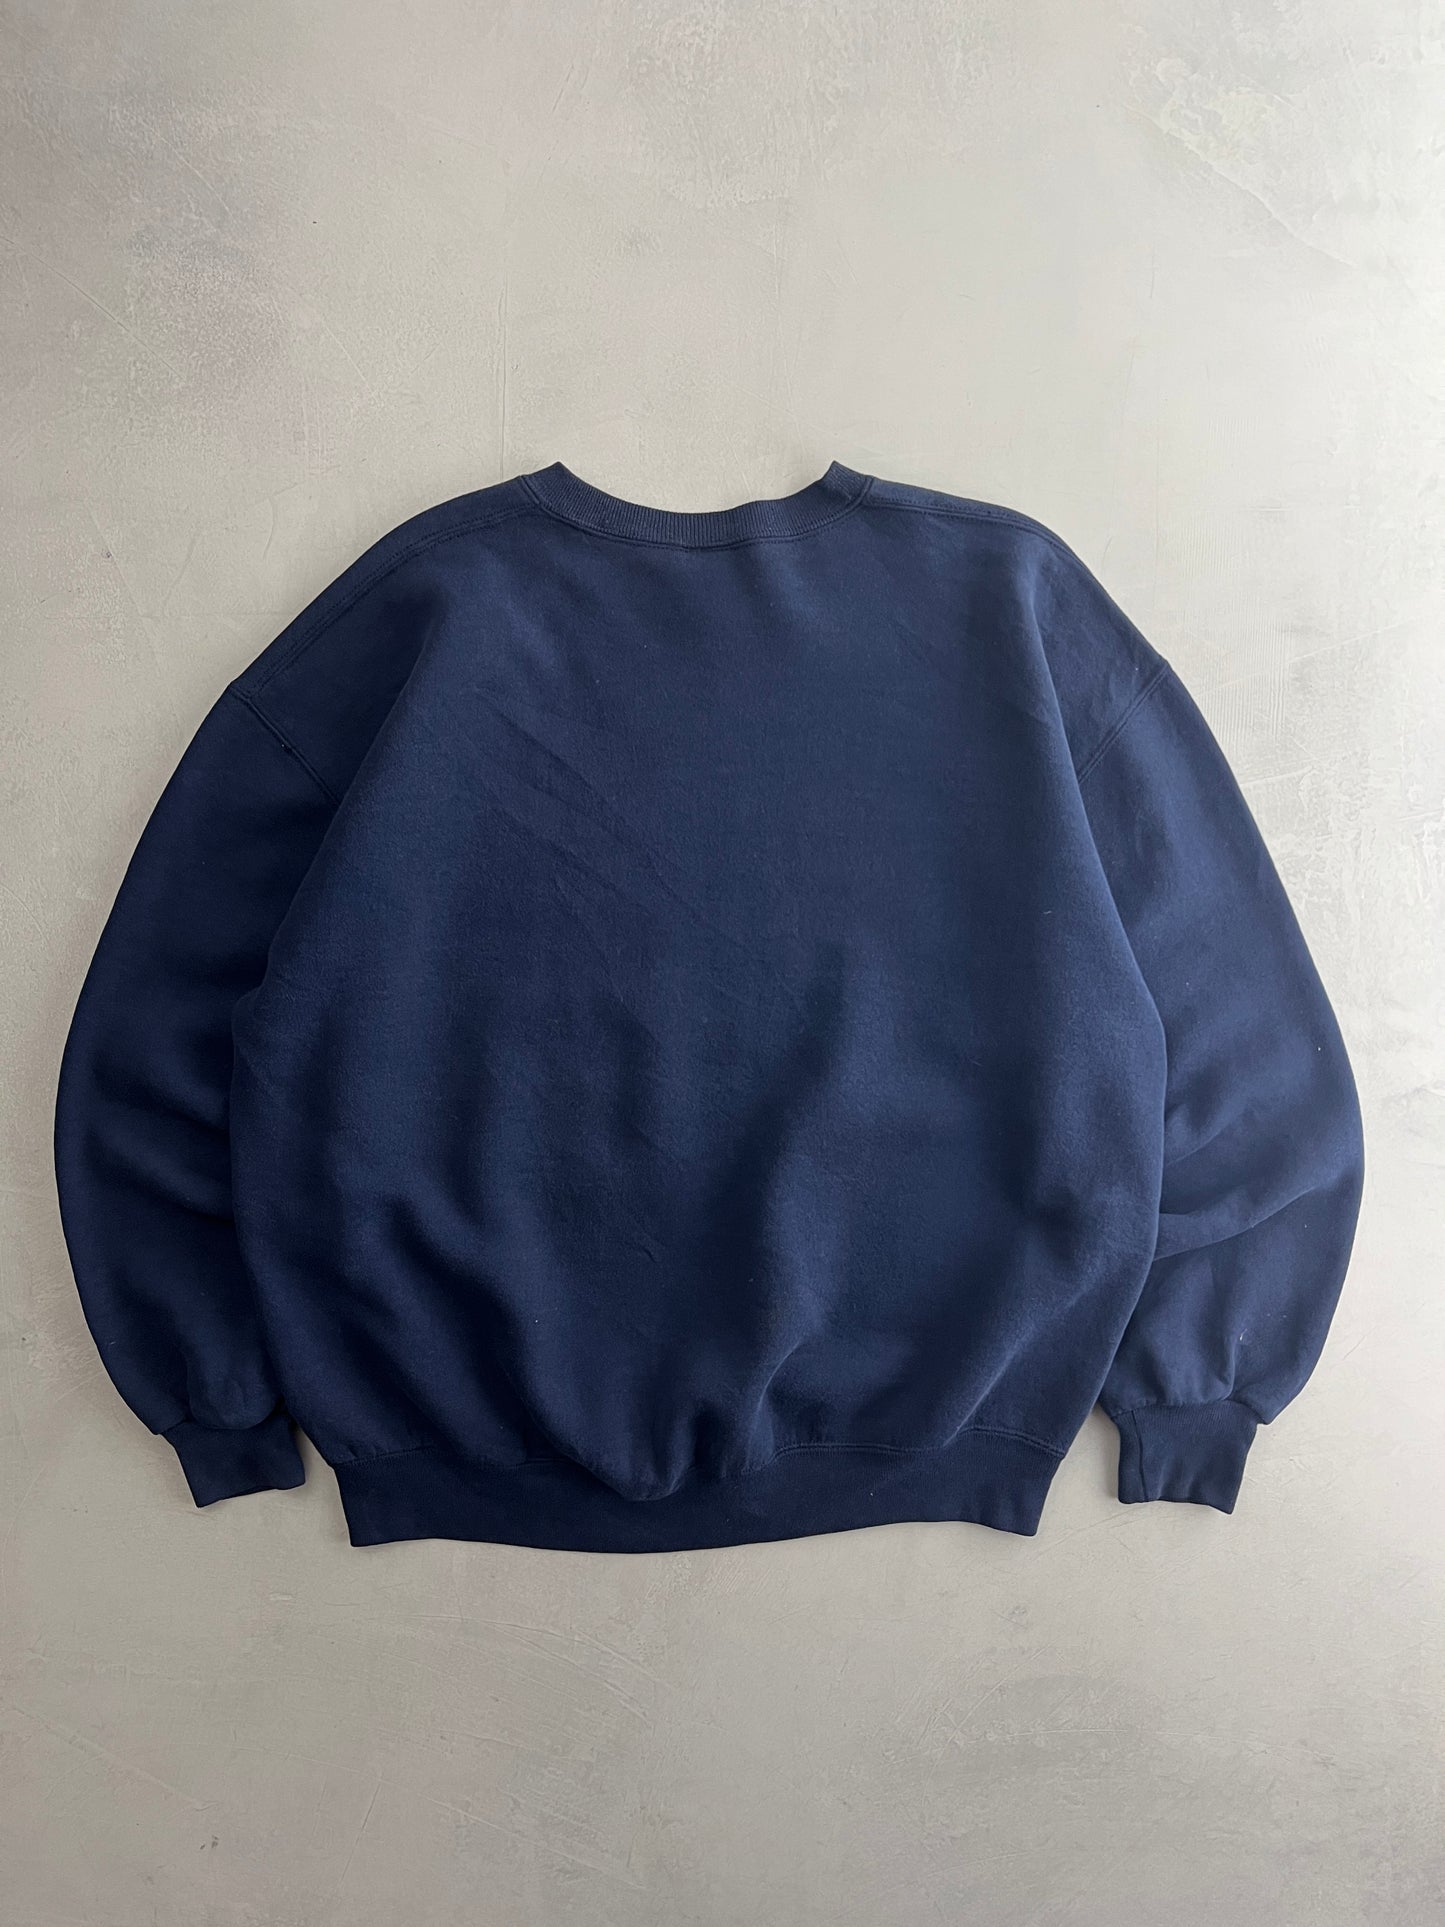 Made In USA Russel Athletic Sweatshirt [XL]